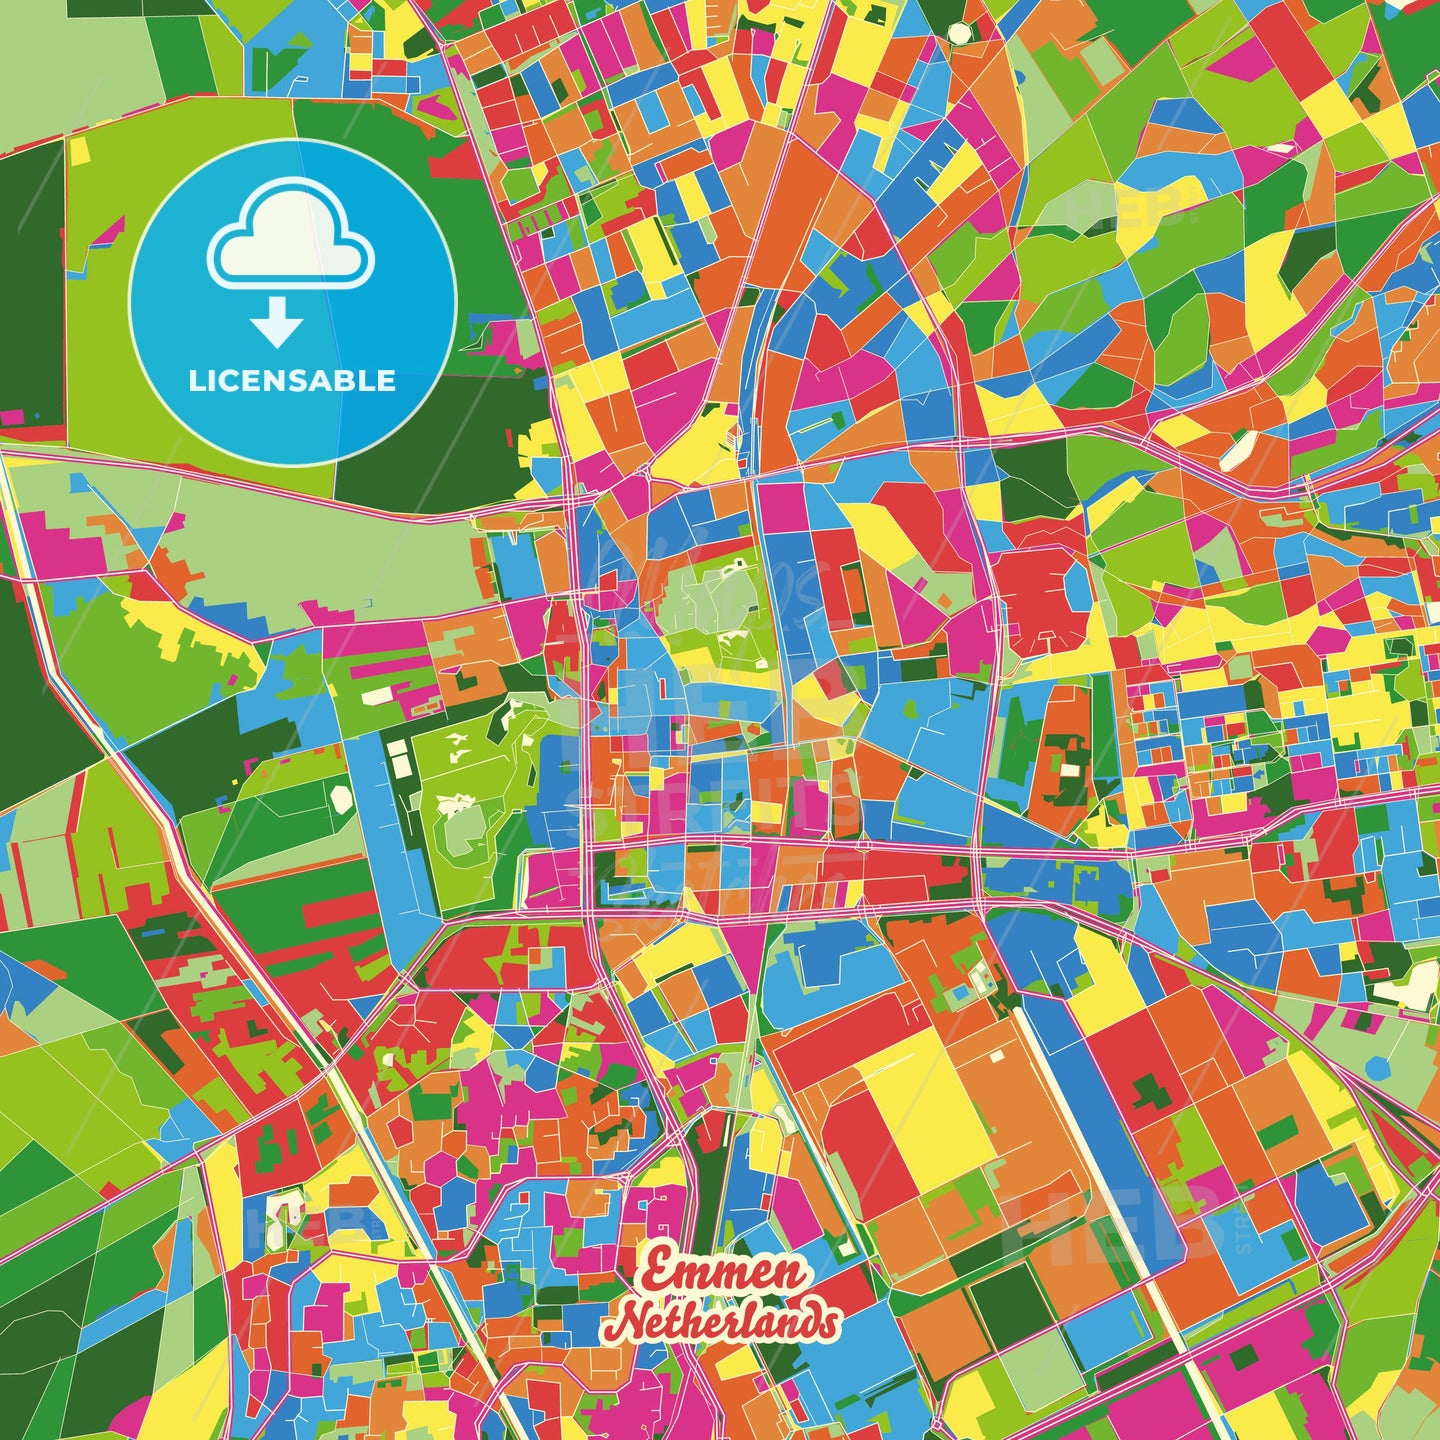 Emmen, Netherlands Crazy Colorful Street Map Poster Template - HEBSTREITS Sketches